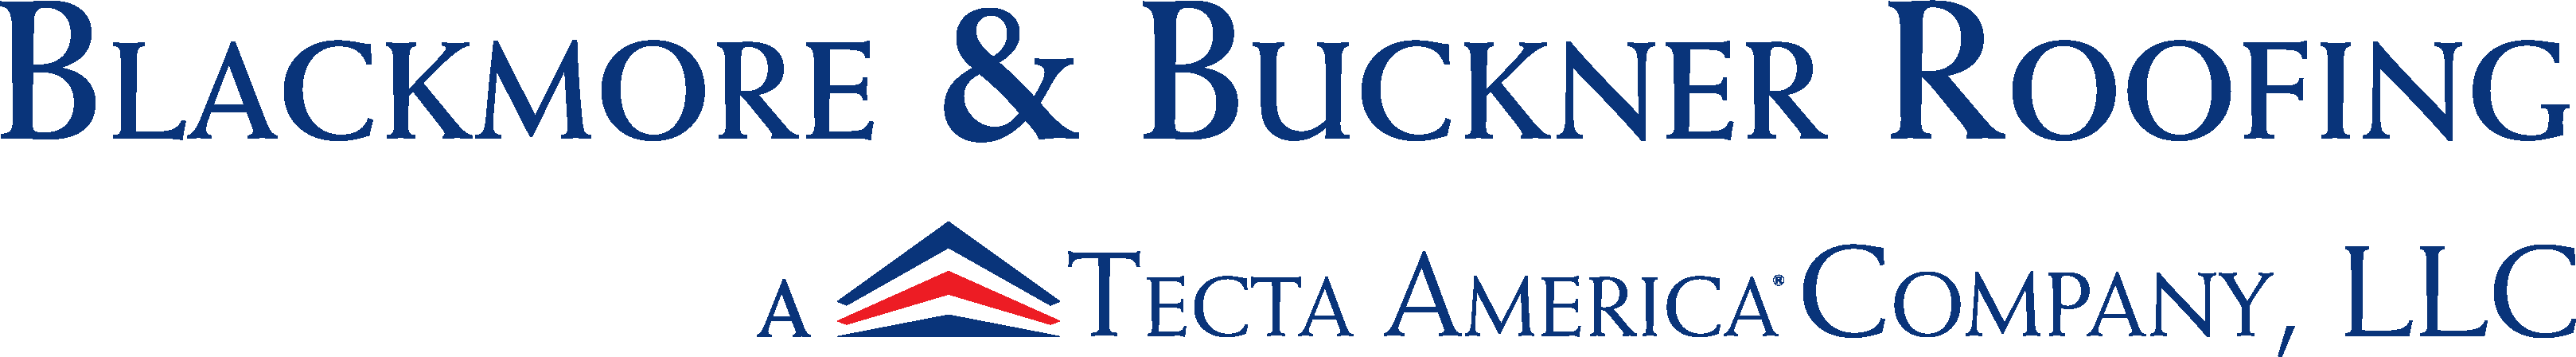 Blackmore and Buckner Roofing Company – Tecta America roofing company in Indiana